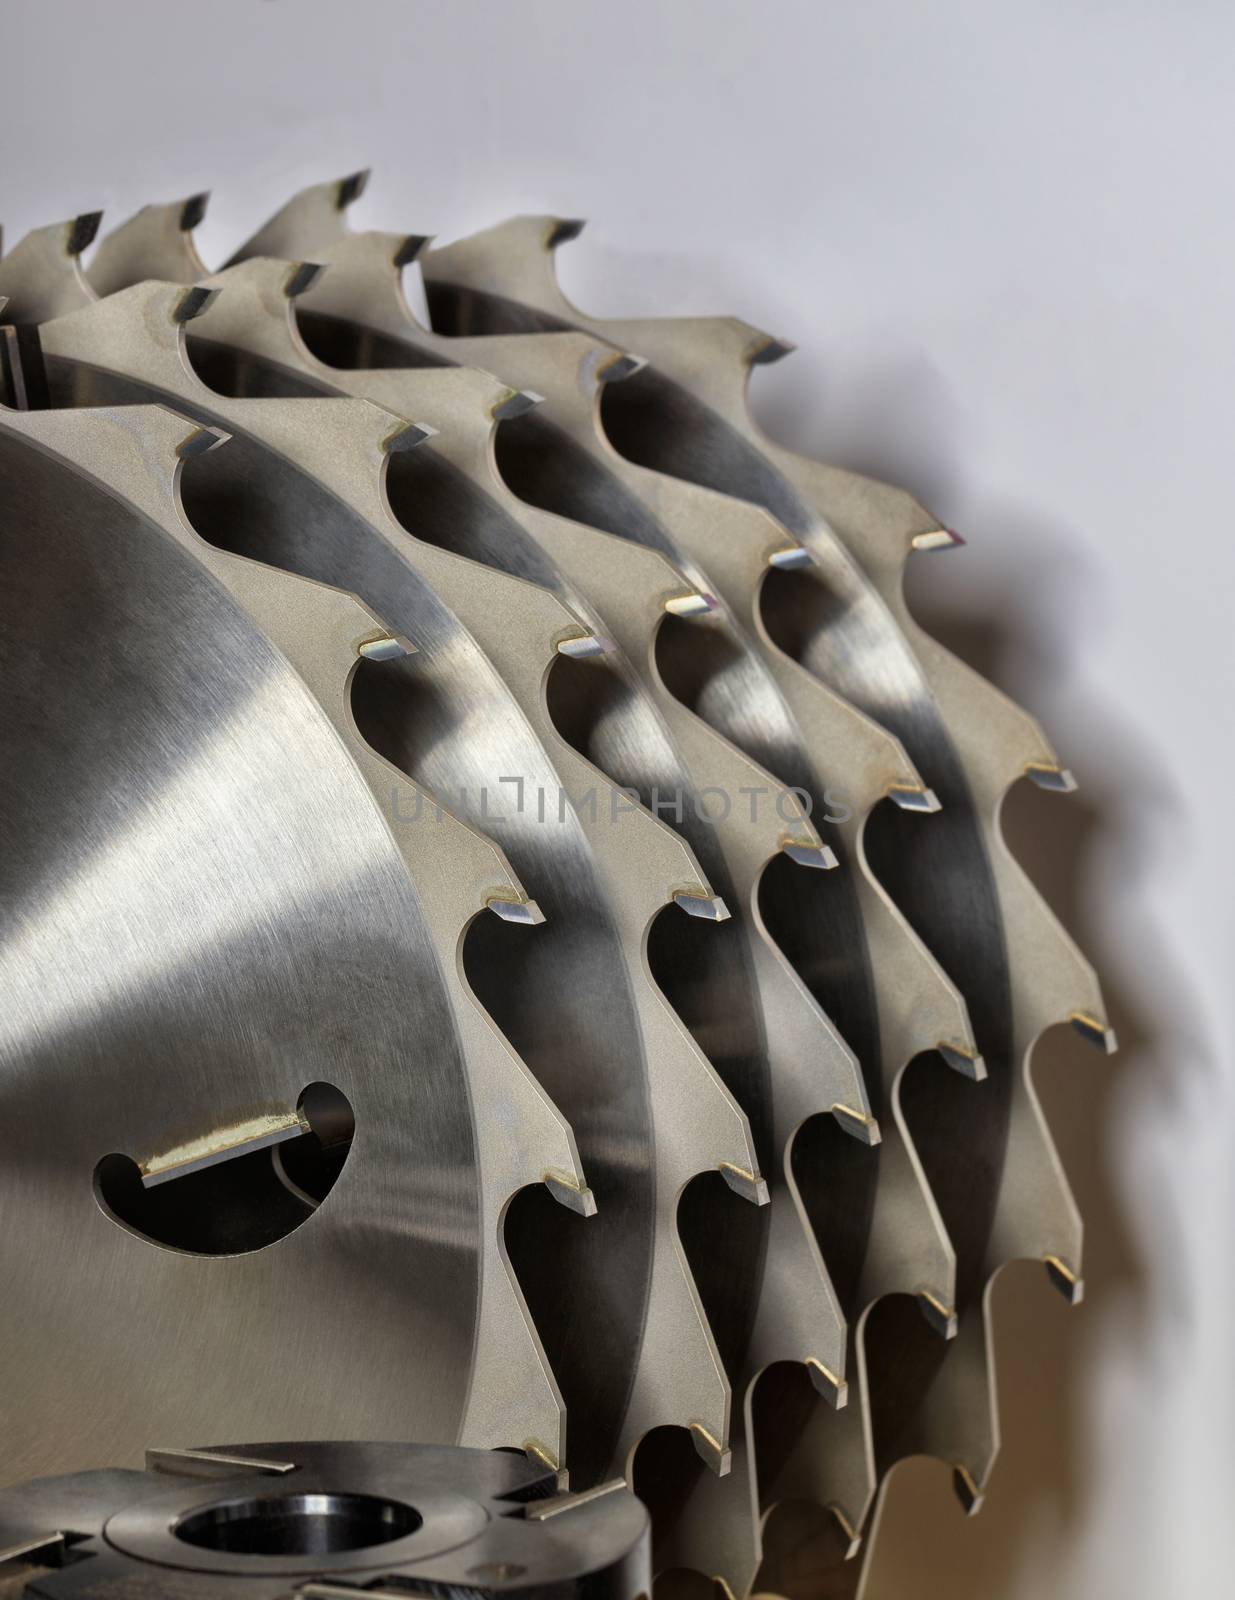 A segment of metal wood milling cutter and circular saws for cutting wood closeup.